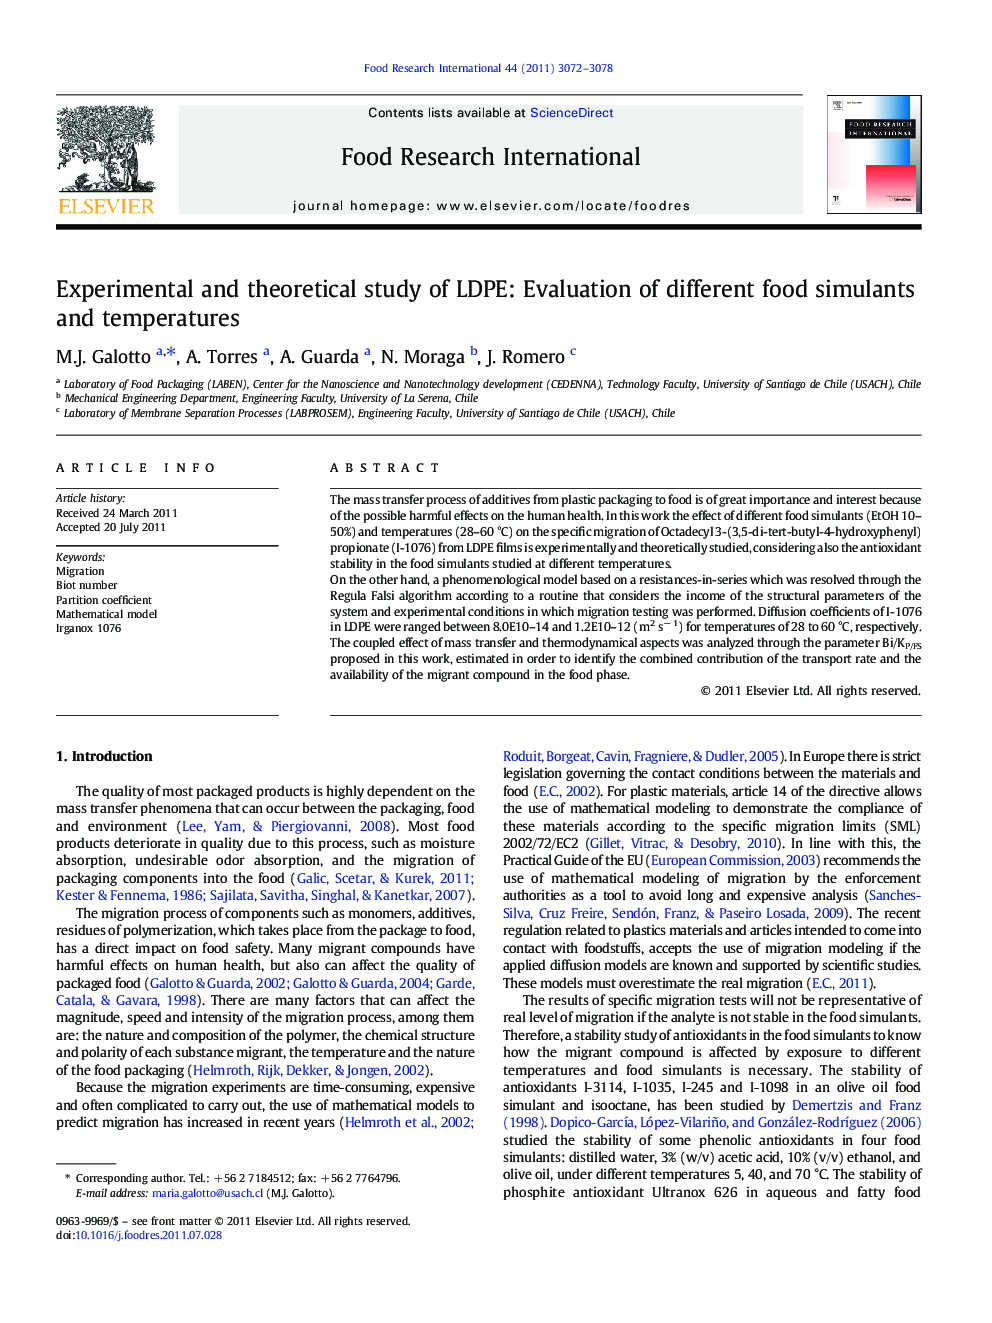 Experimental and theoretical study of LDPE: Evaluation of different food simulants and temperatures